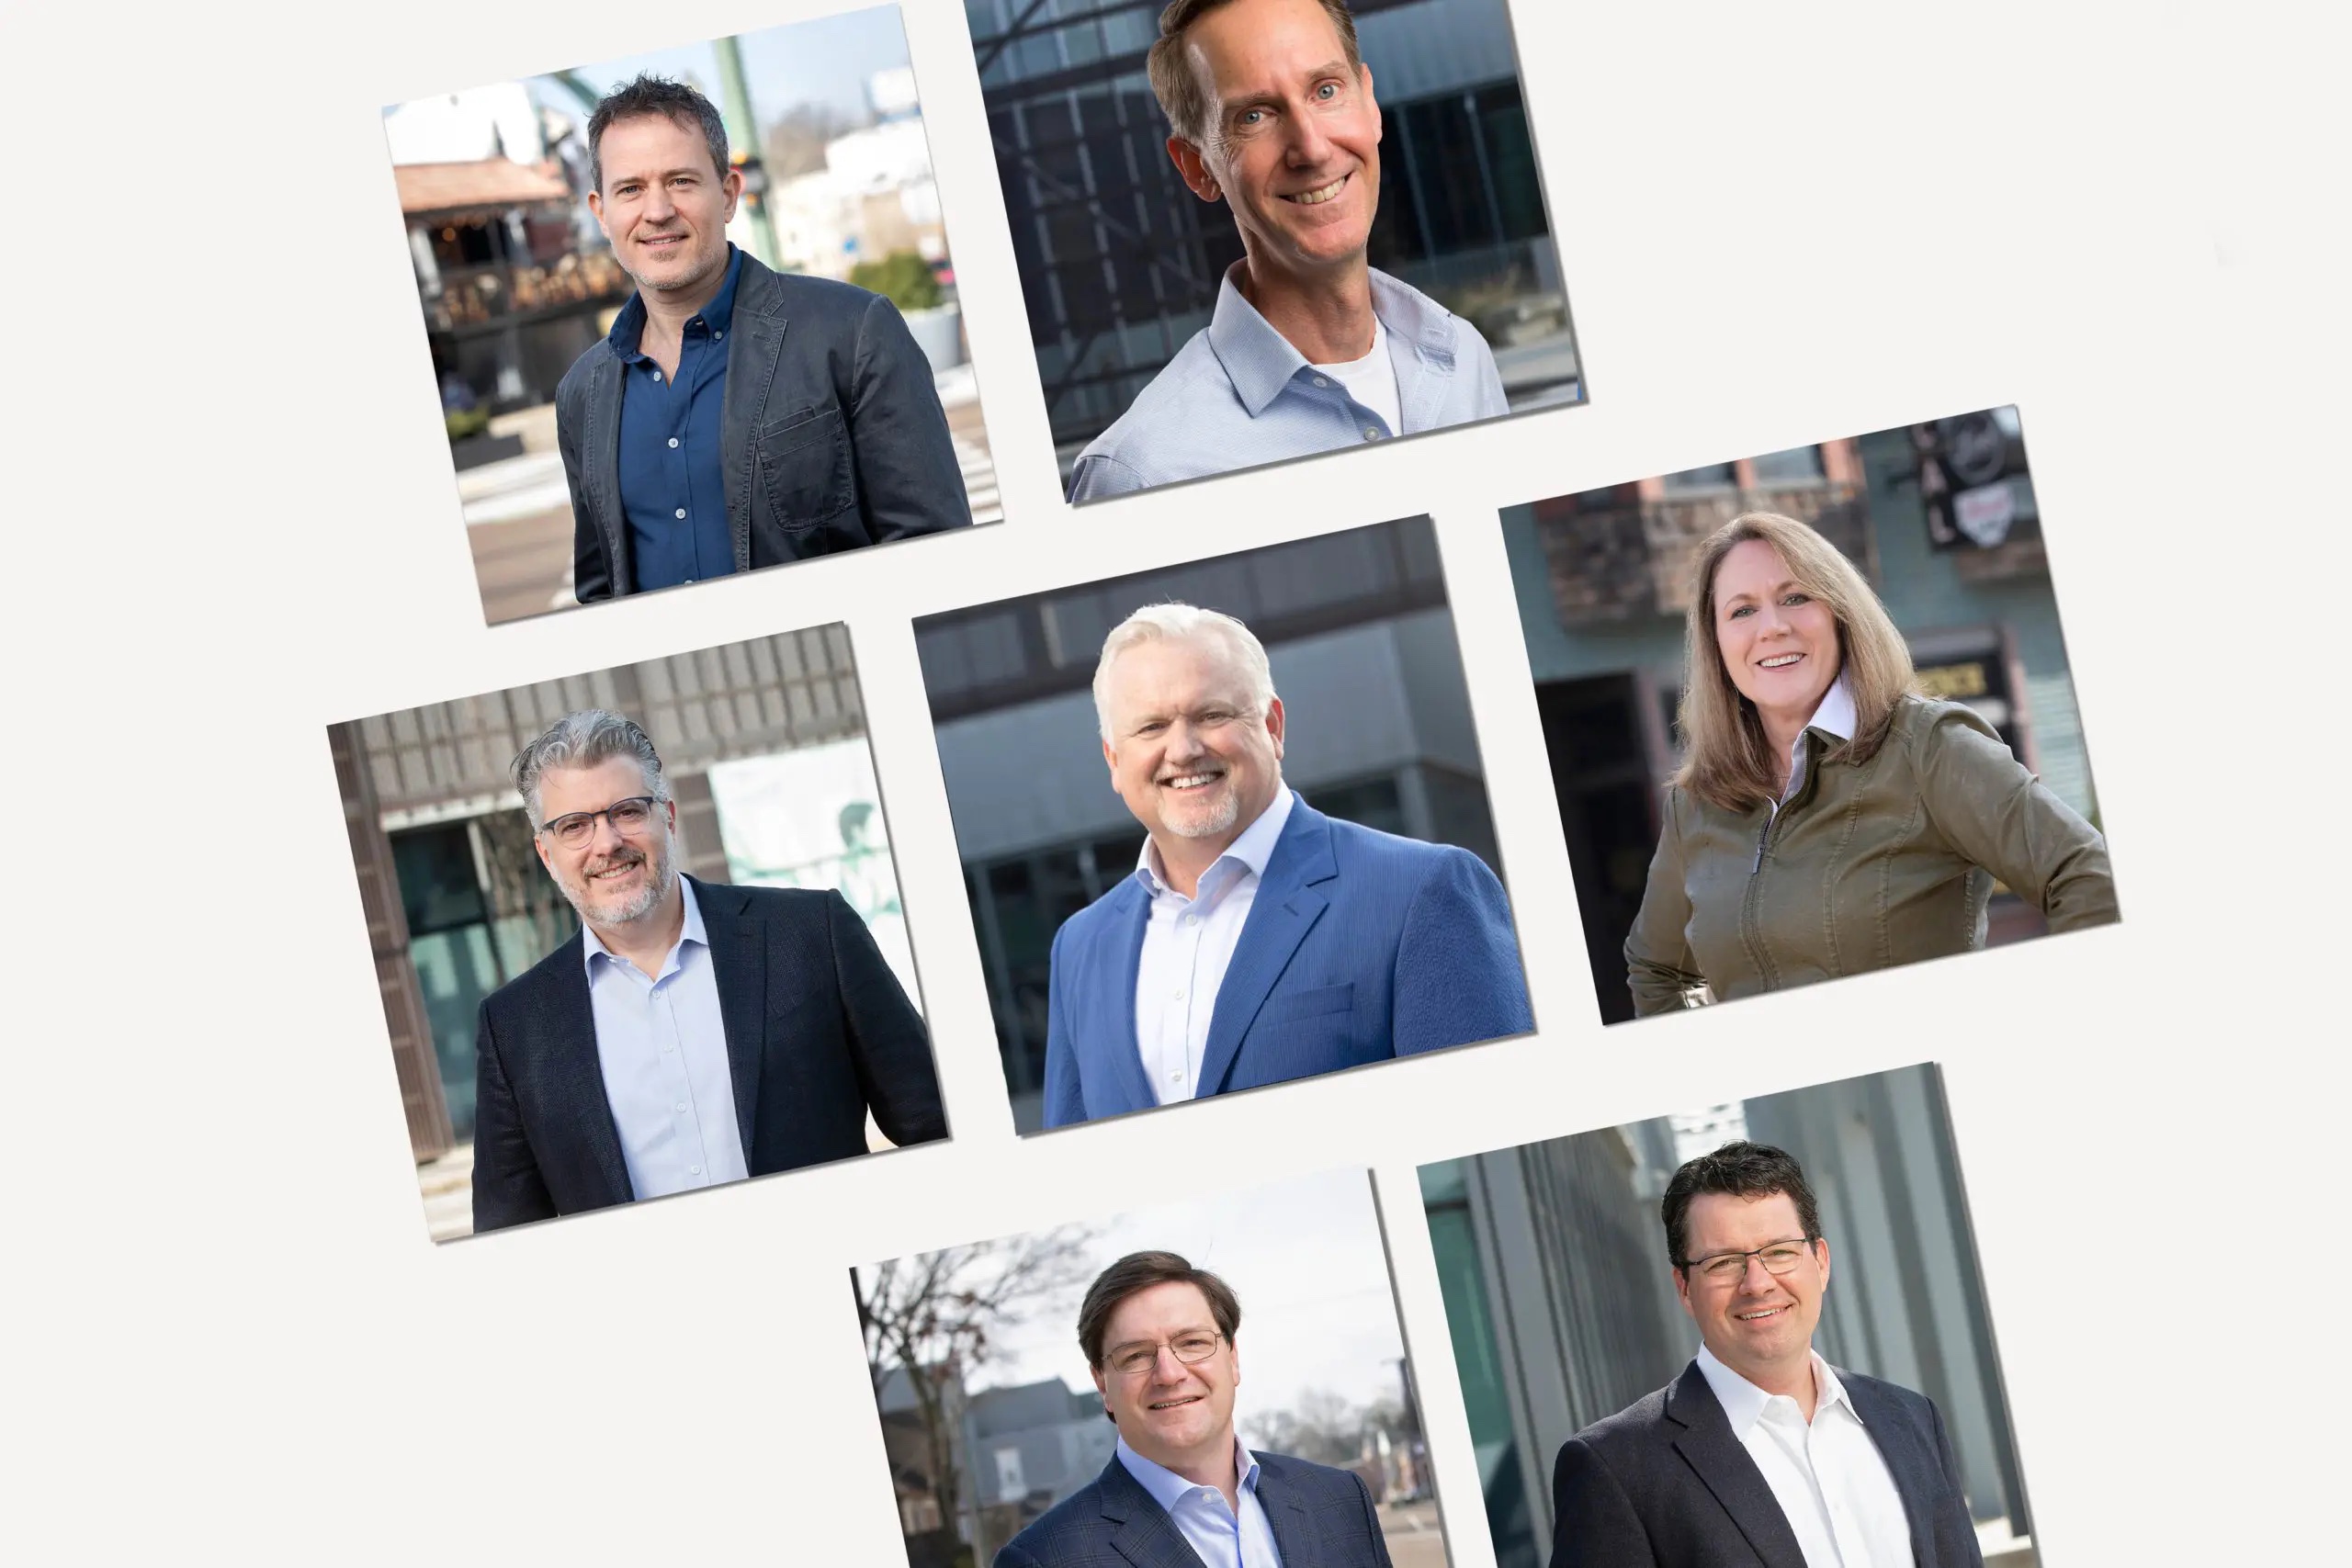 Meet the innovators who lead Mimeo in finding better, smarter solutions for our customers every day.